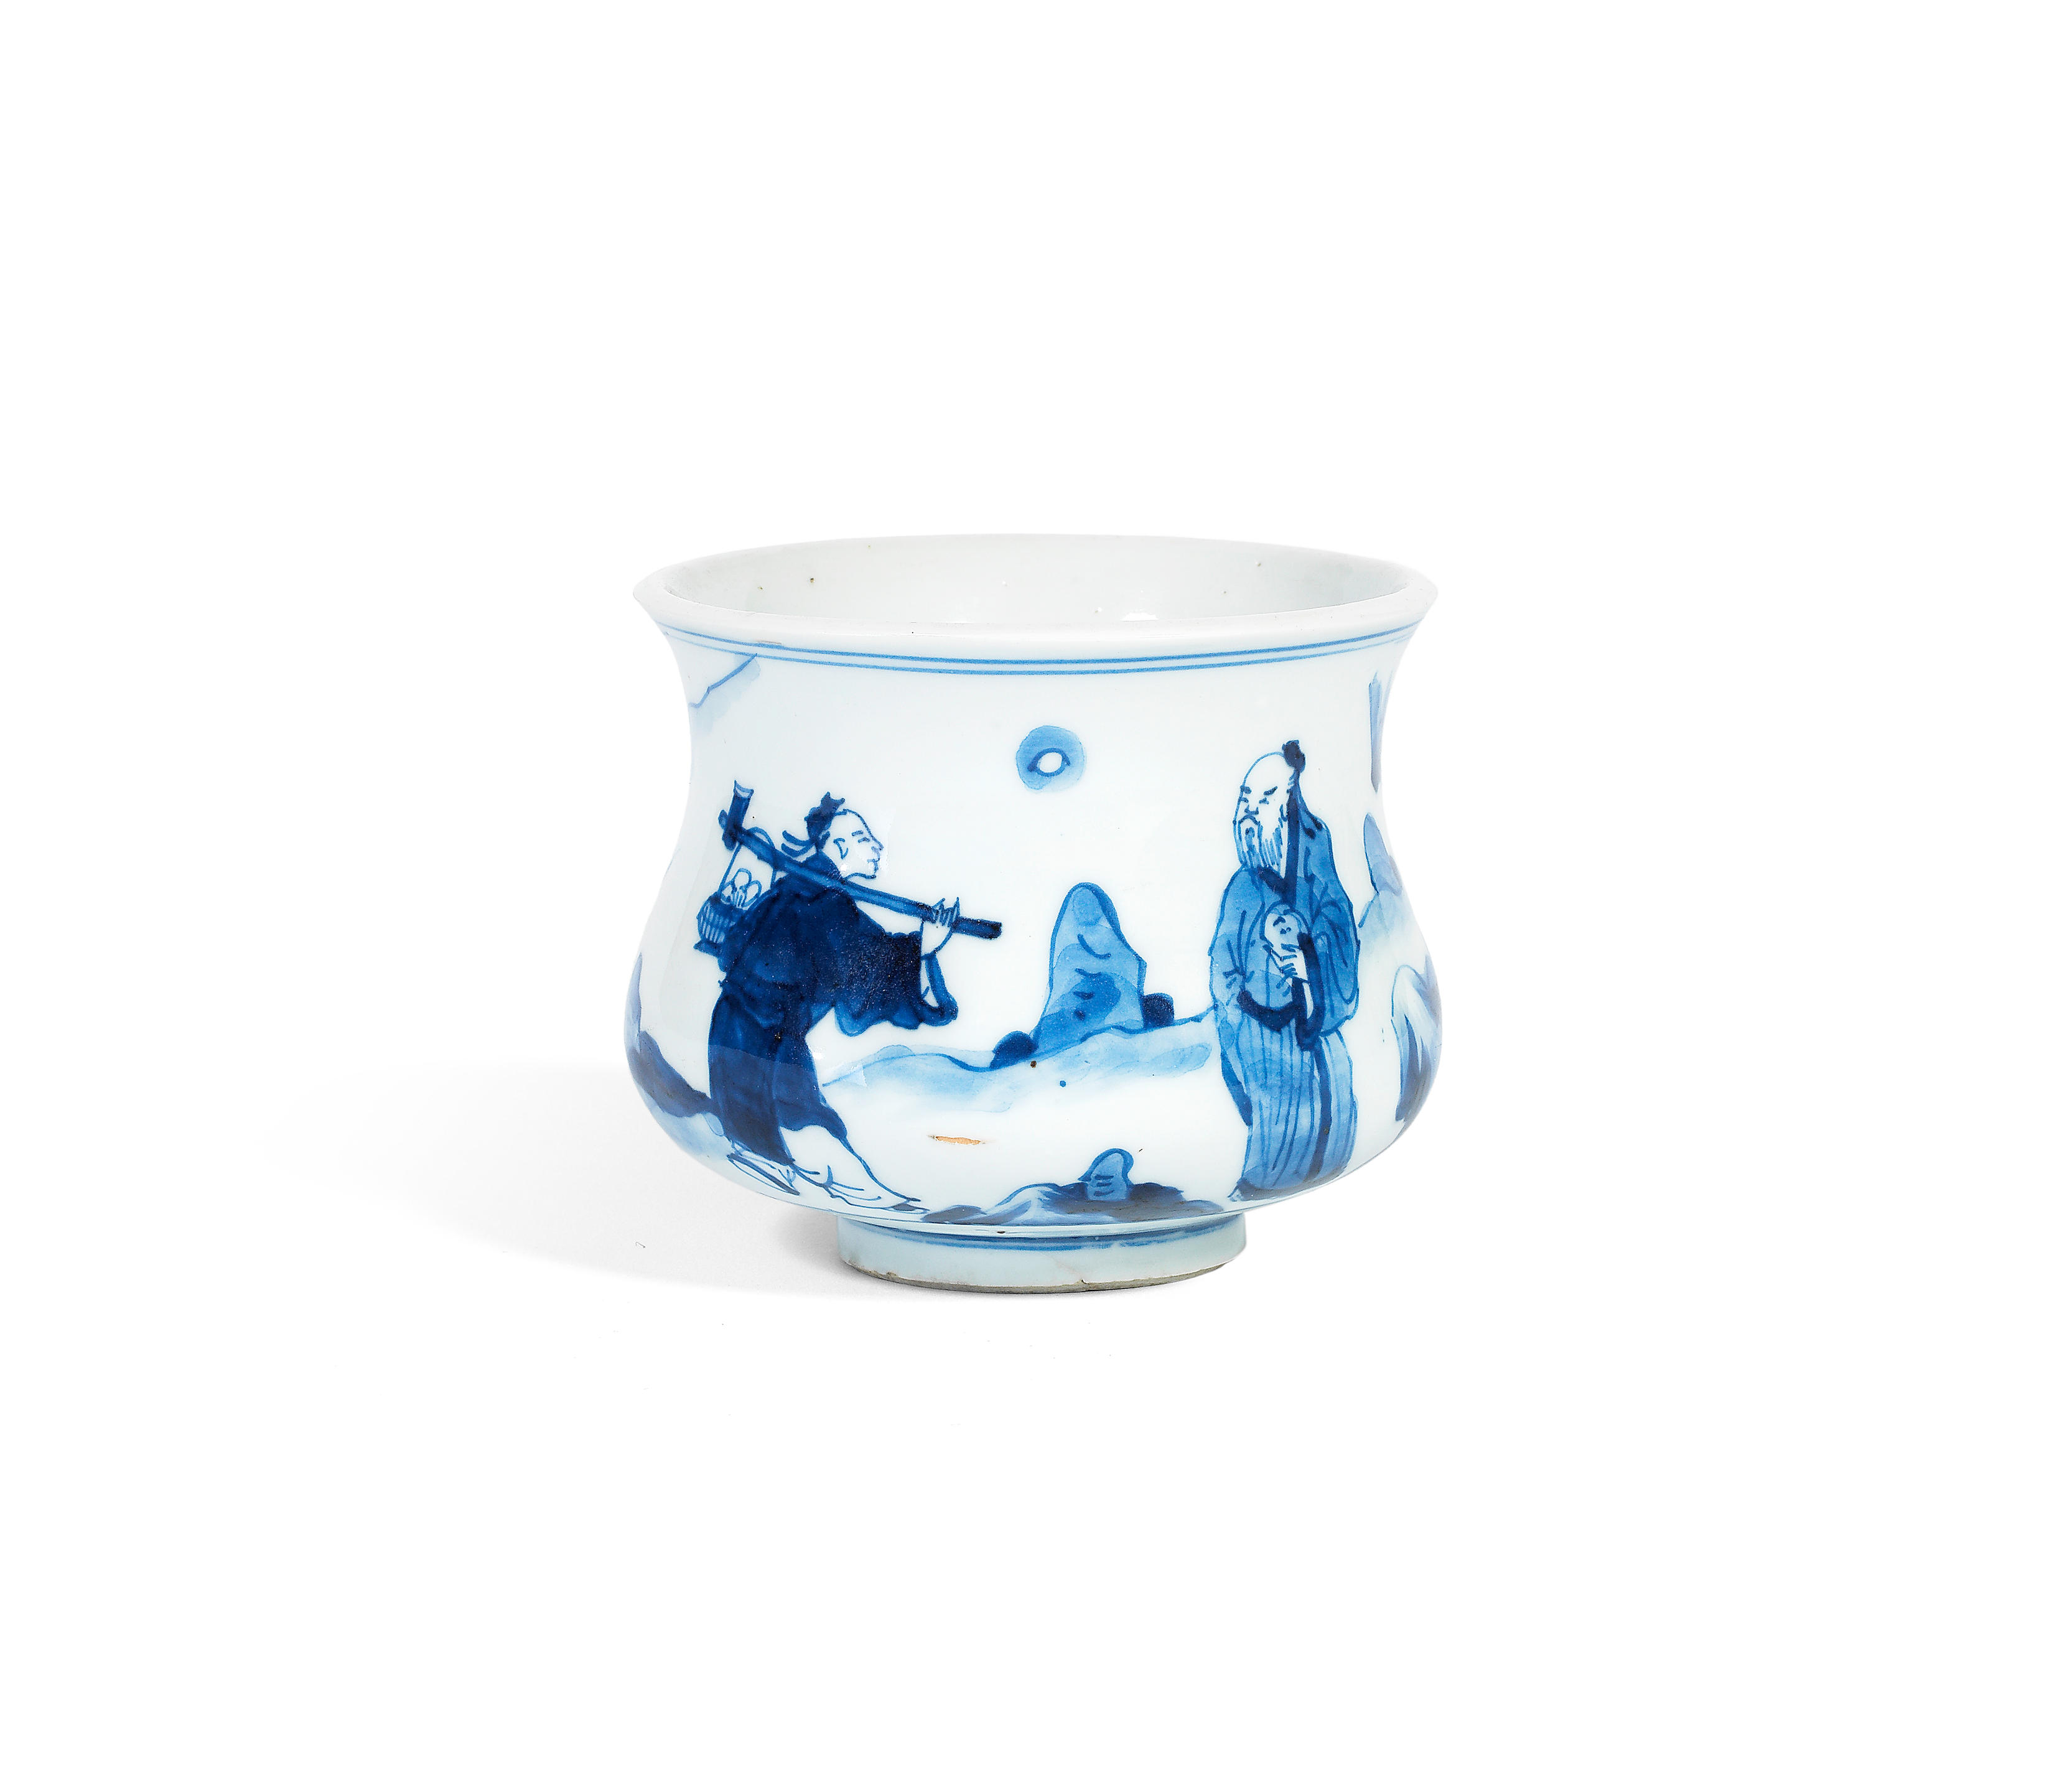 A Blue and White Deep incense burner